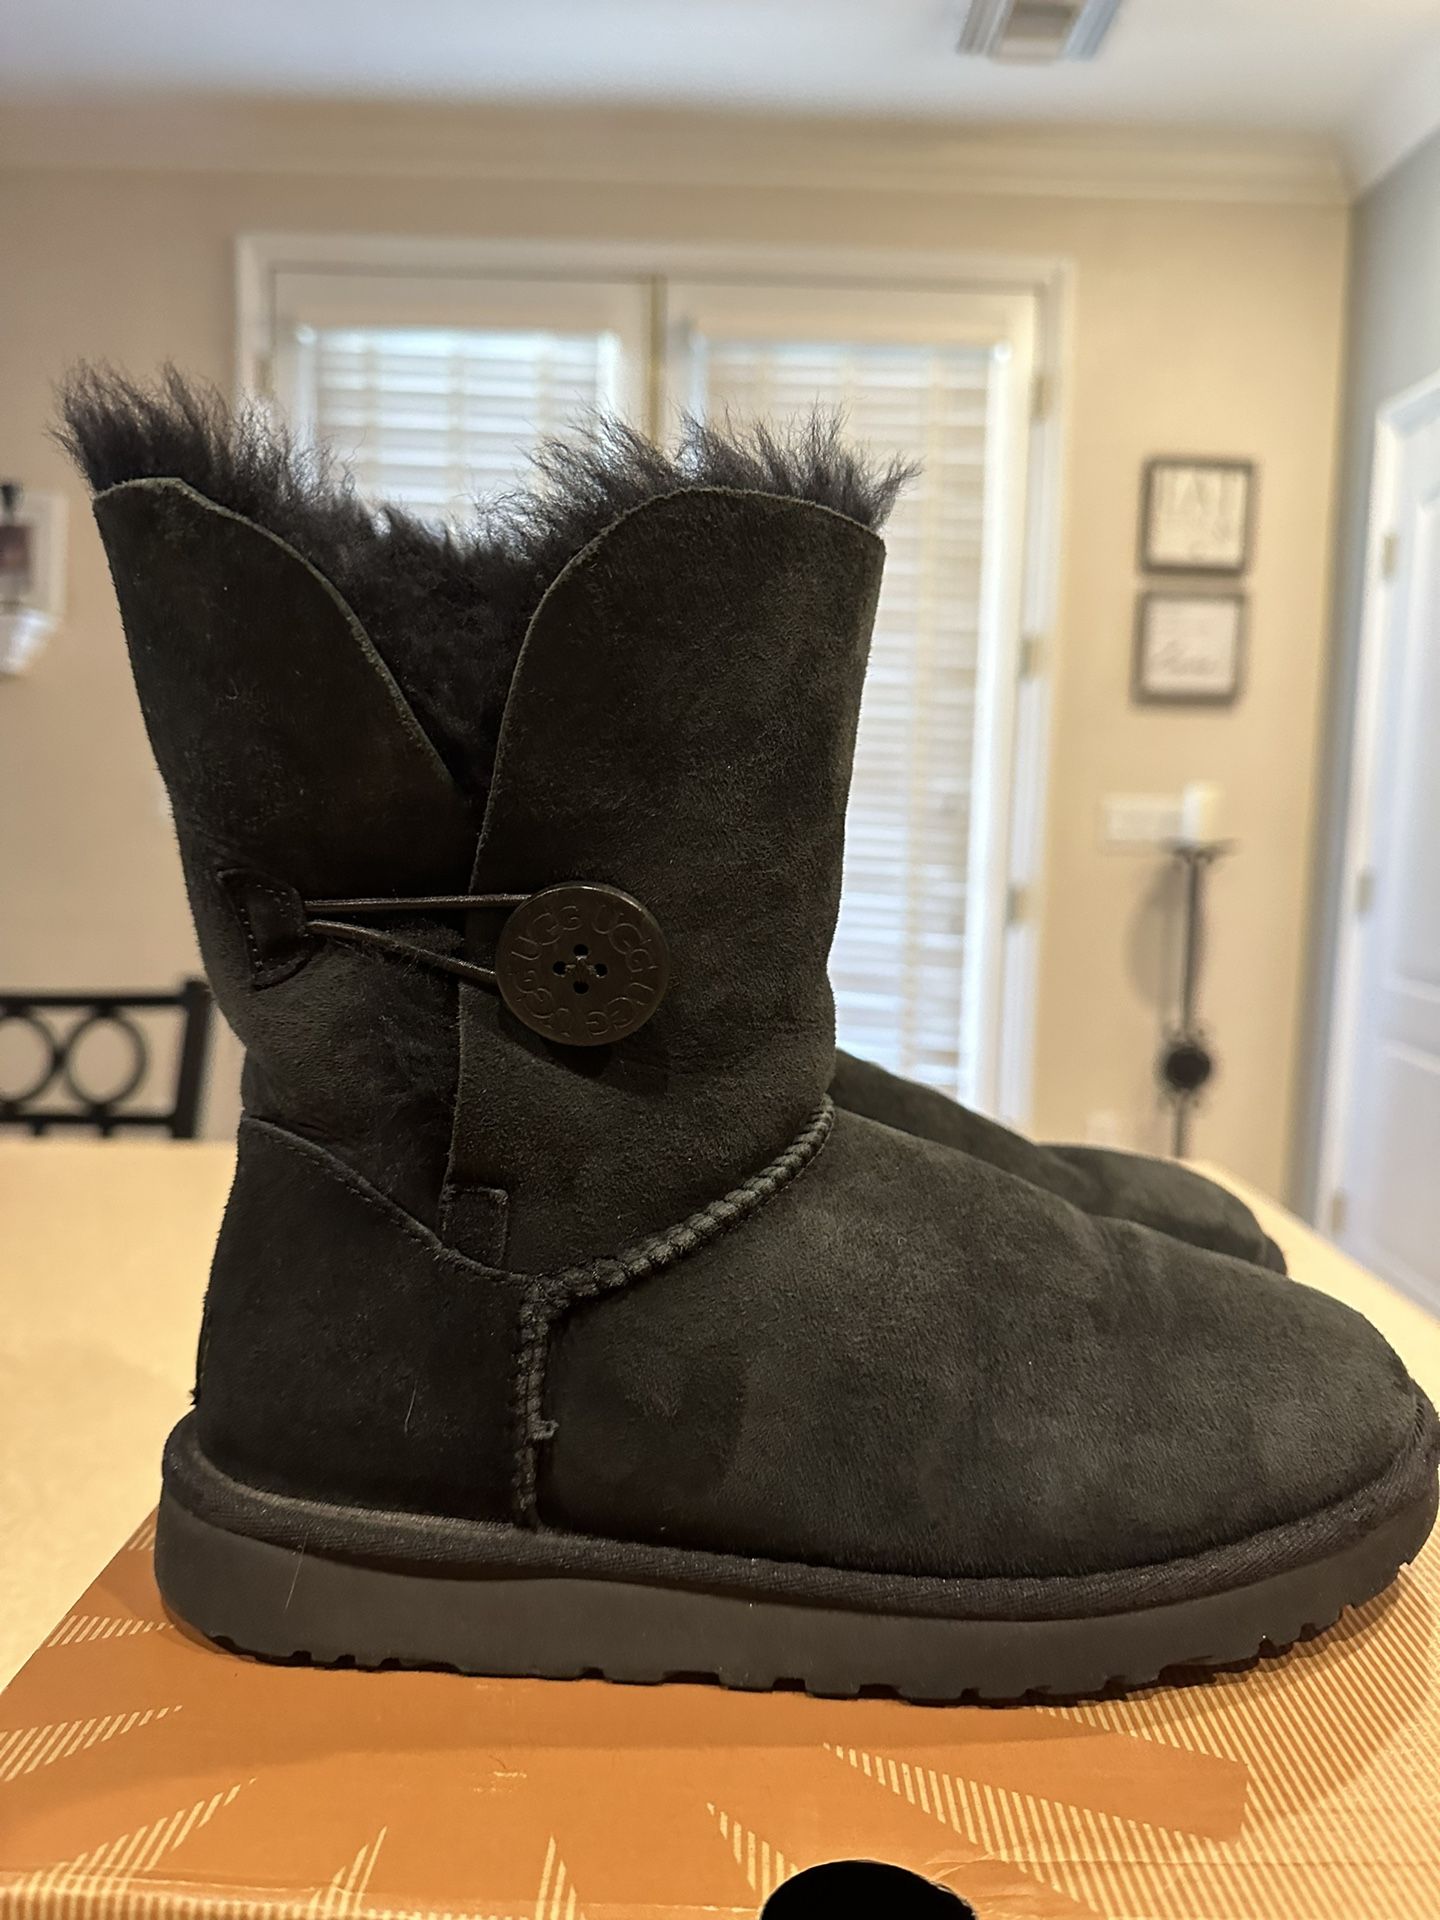 Ugg Boots - Bailey Button Size 7 - Black